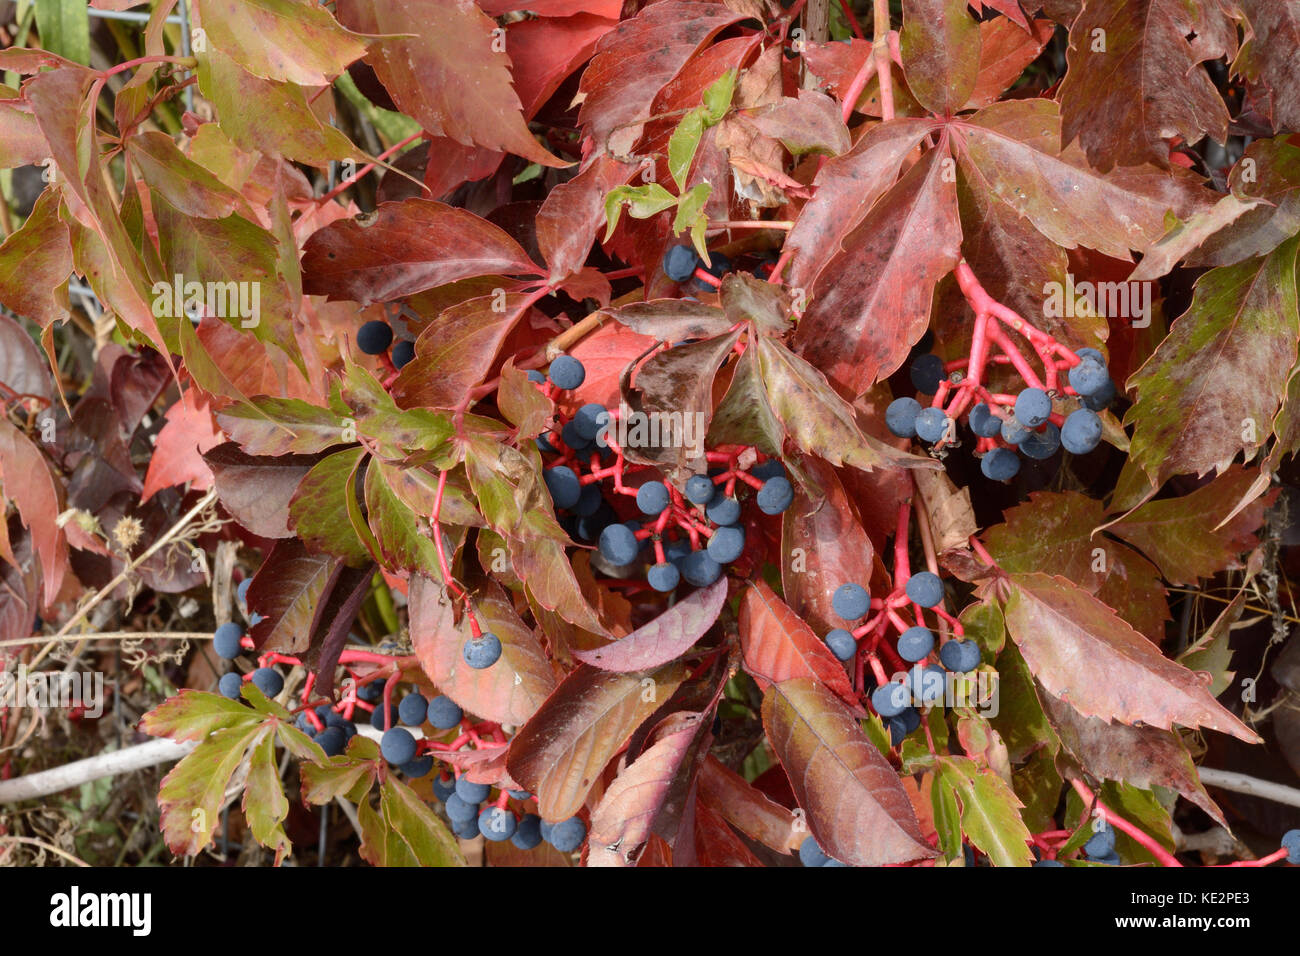 Thicket creeper or Parthenocissus inserta in autumn with berries Stock Photo